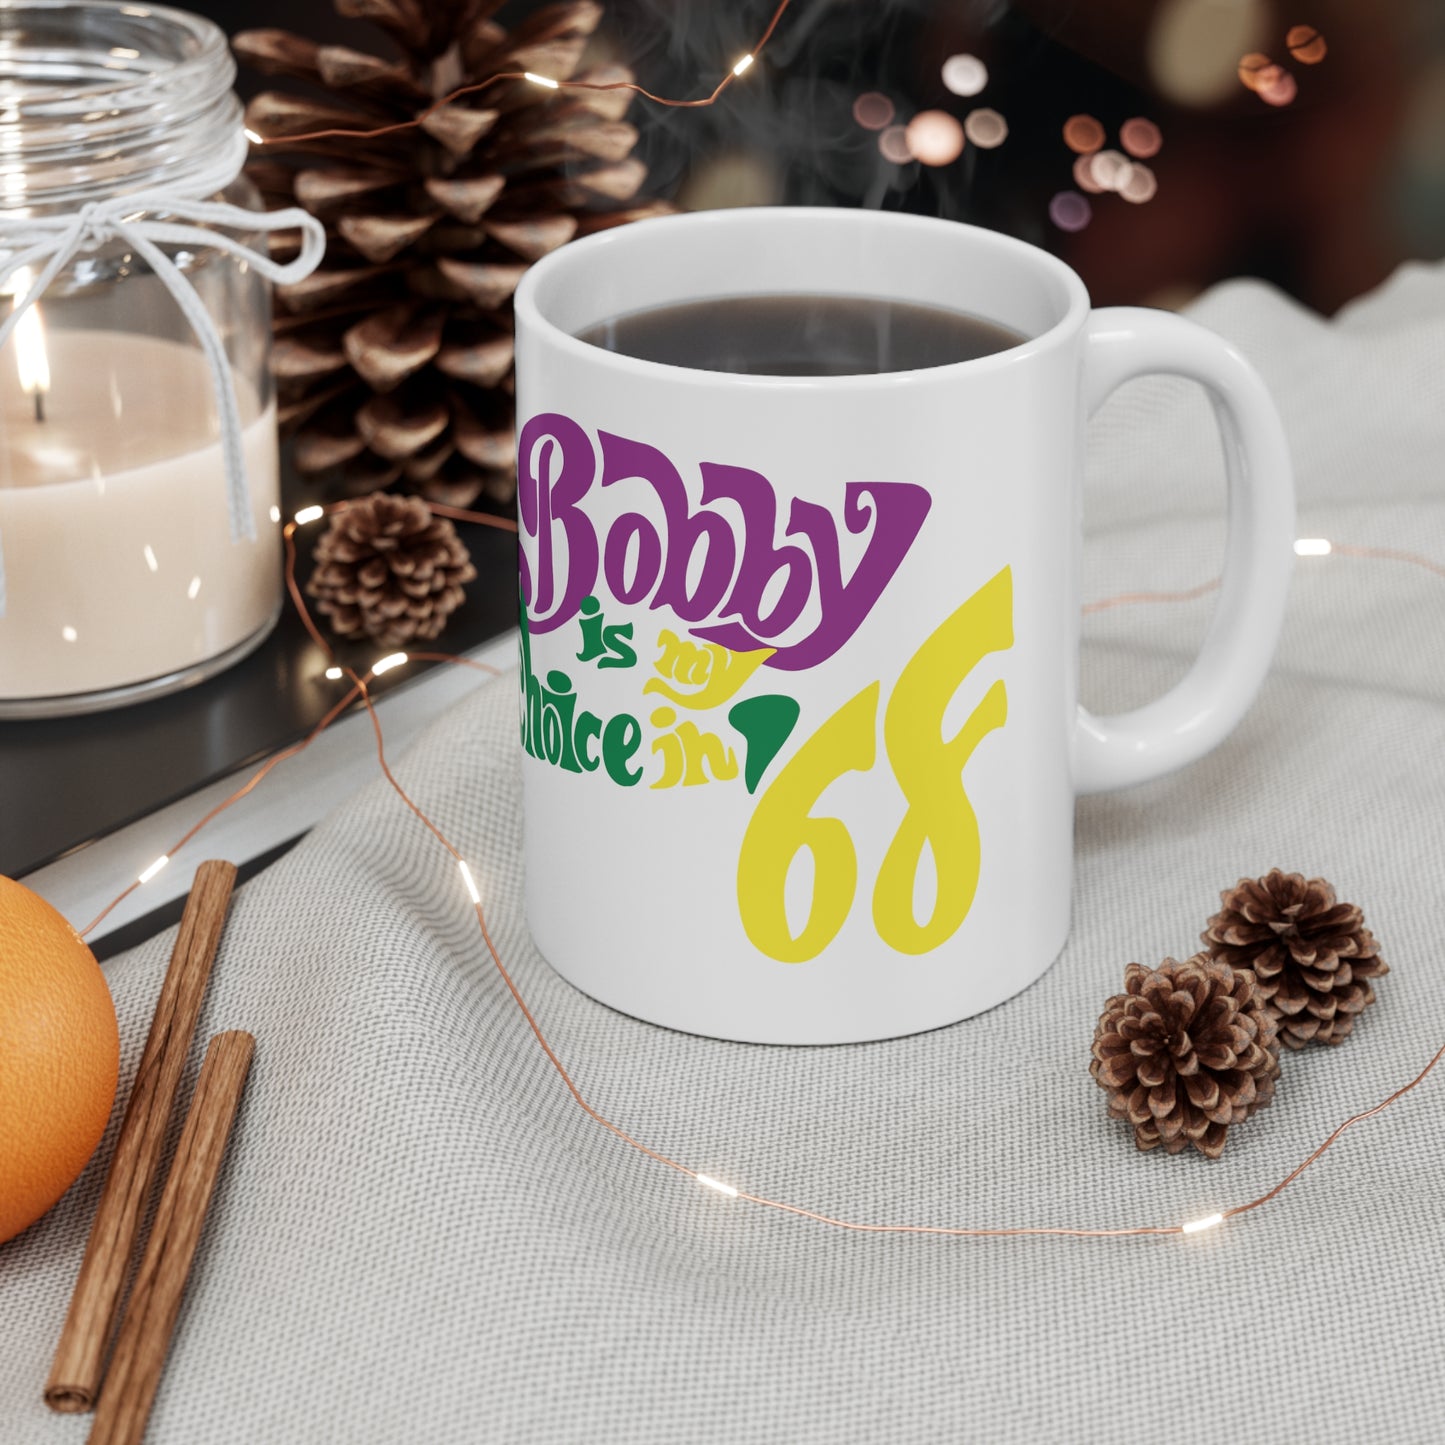 Retro Campaign Button For Robert F Kennedy Bobby Is My Choice In '68 Ceramic Coffee Mug